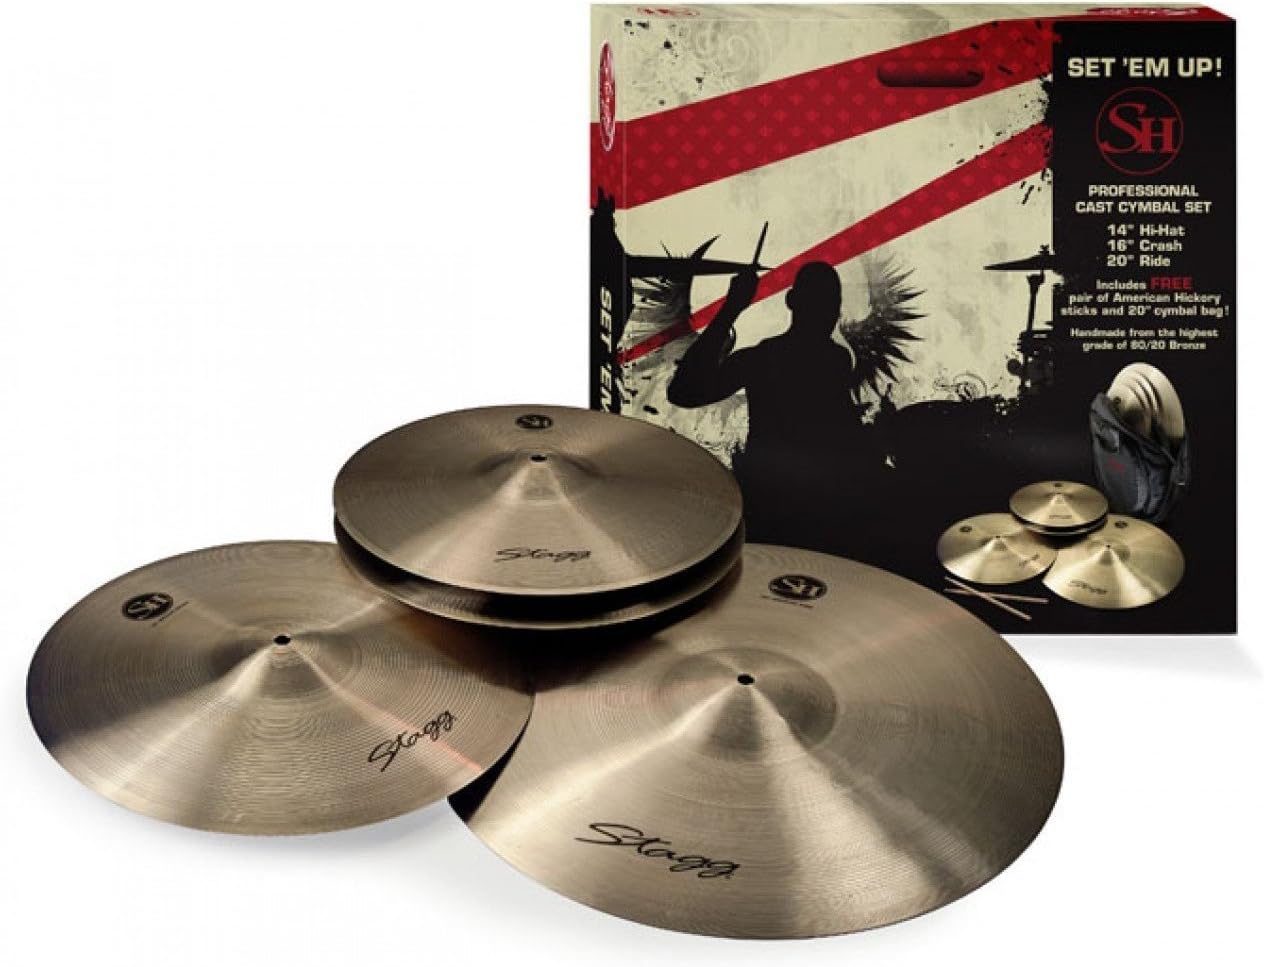 SH-SET SH Series Cymbals Set with Cymbal Bag and Pair of Stick